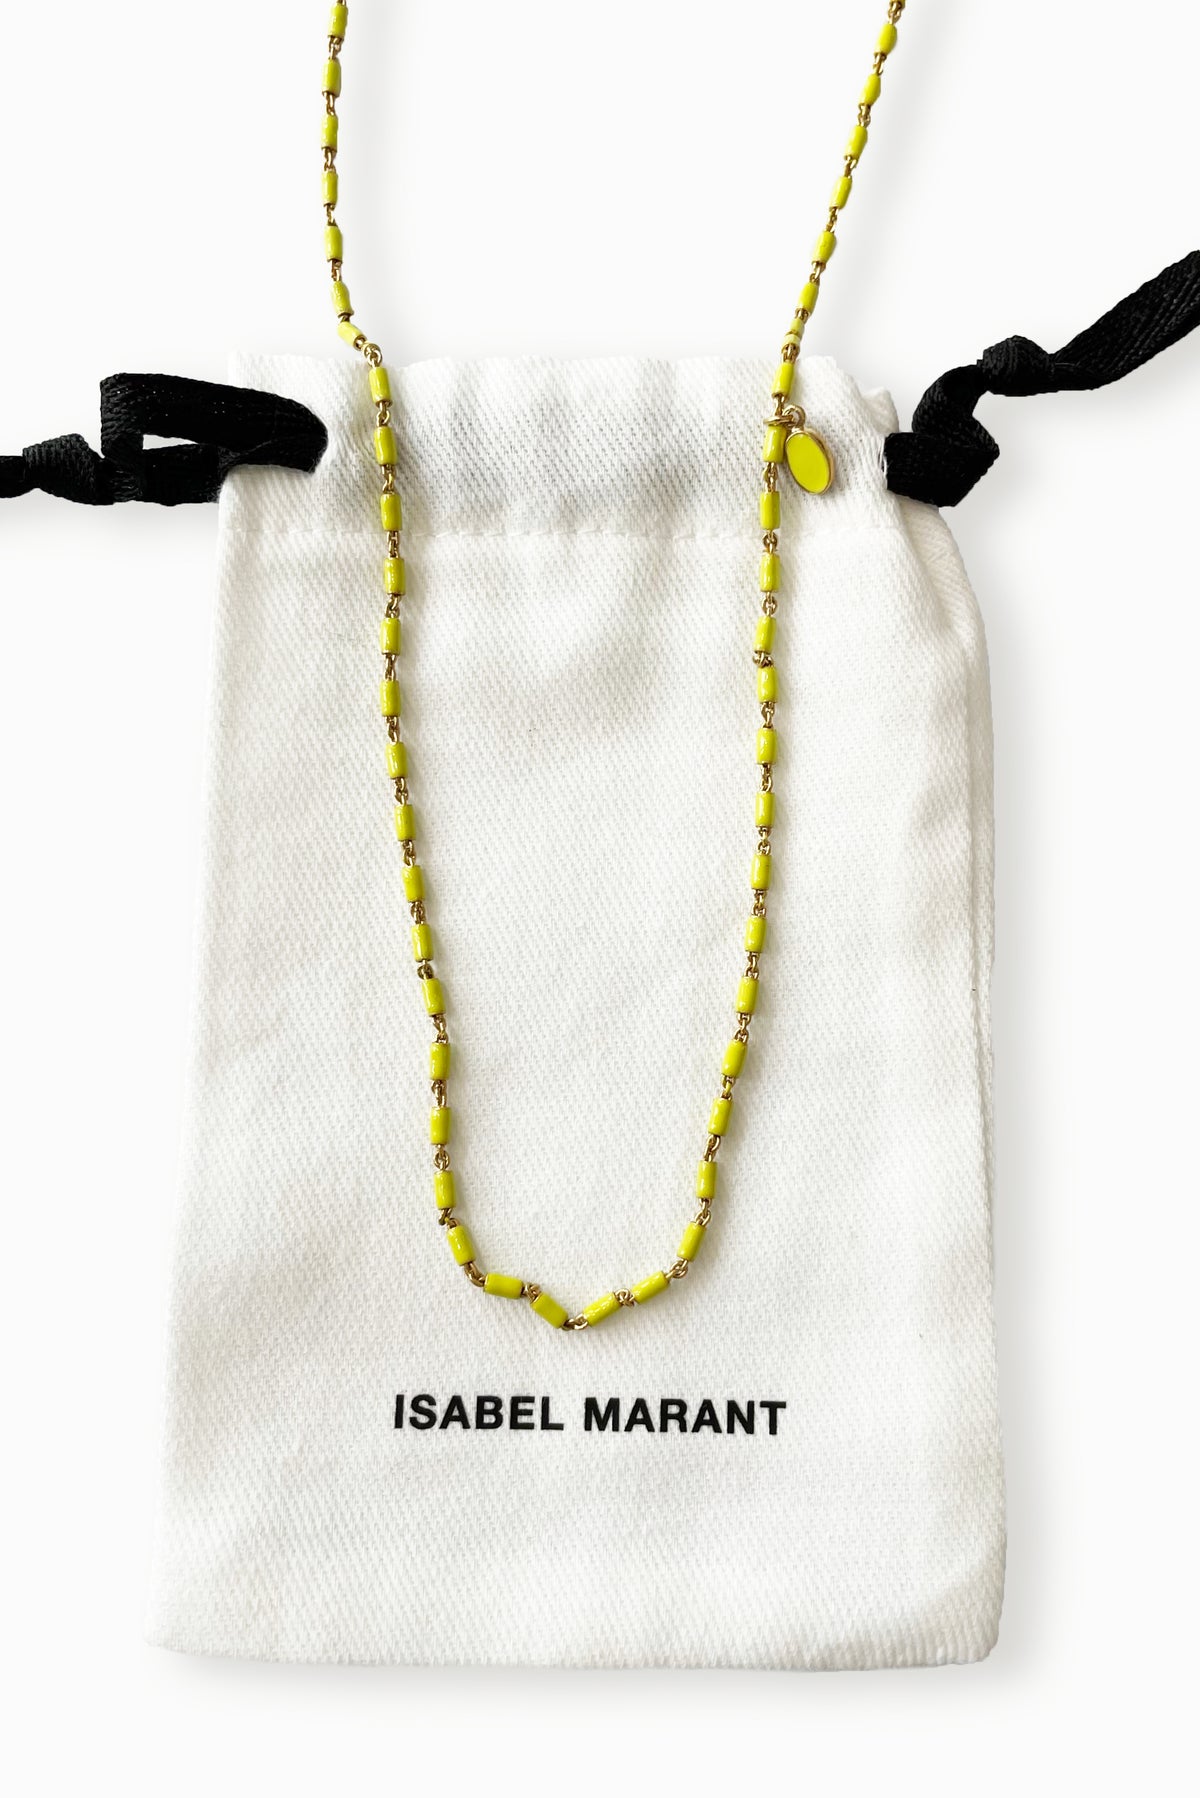 Isabel Marant Casablanca Necklace with Pendant